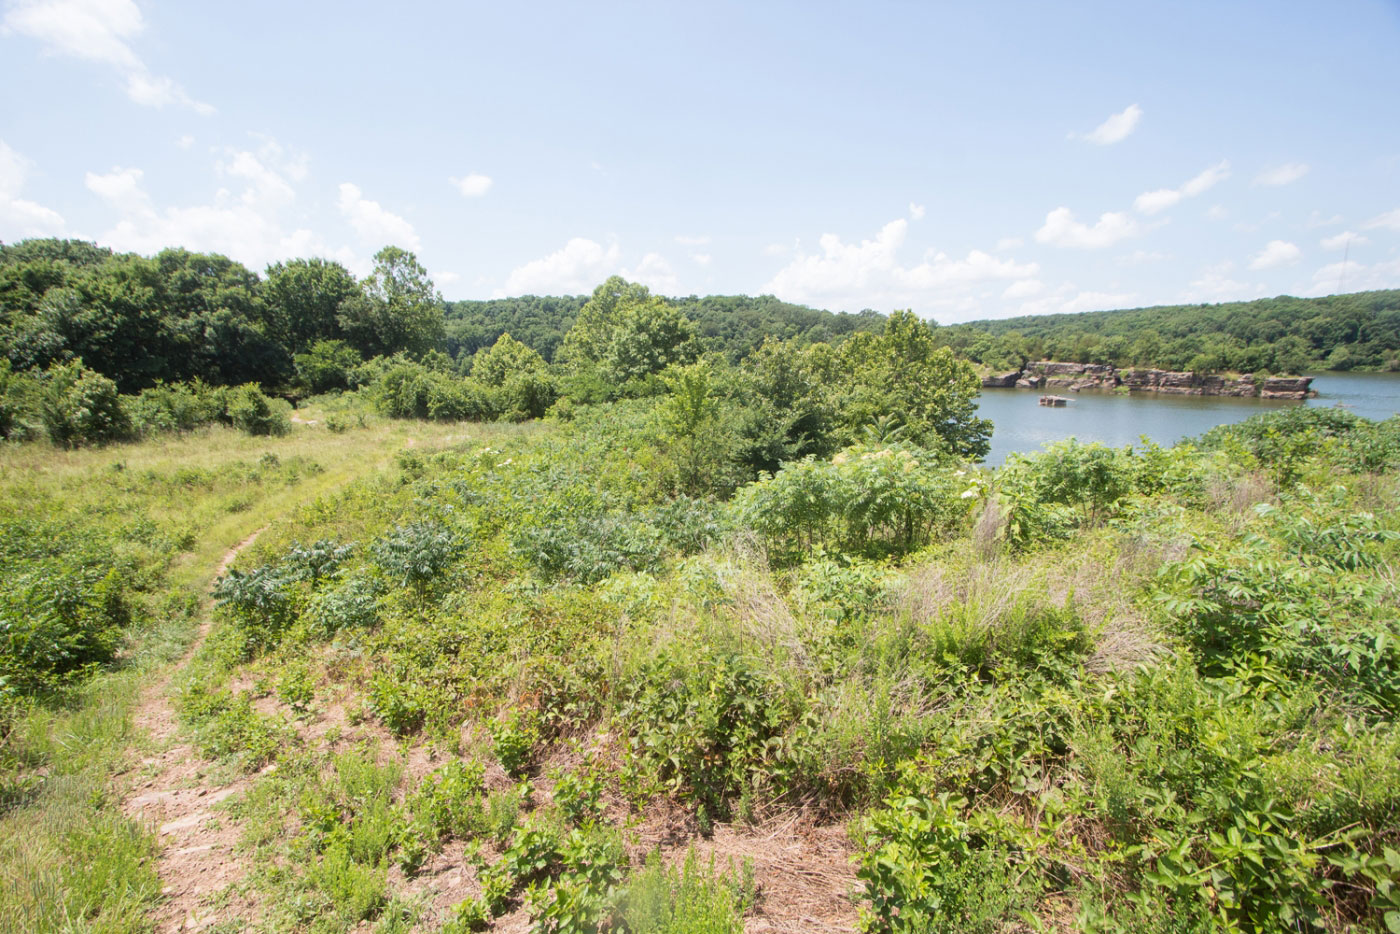 Hike Eagle View and Lake Loop in Lincoln Lake City Park, Arkansas - Stav is Lost